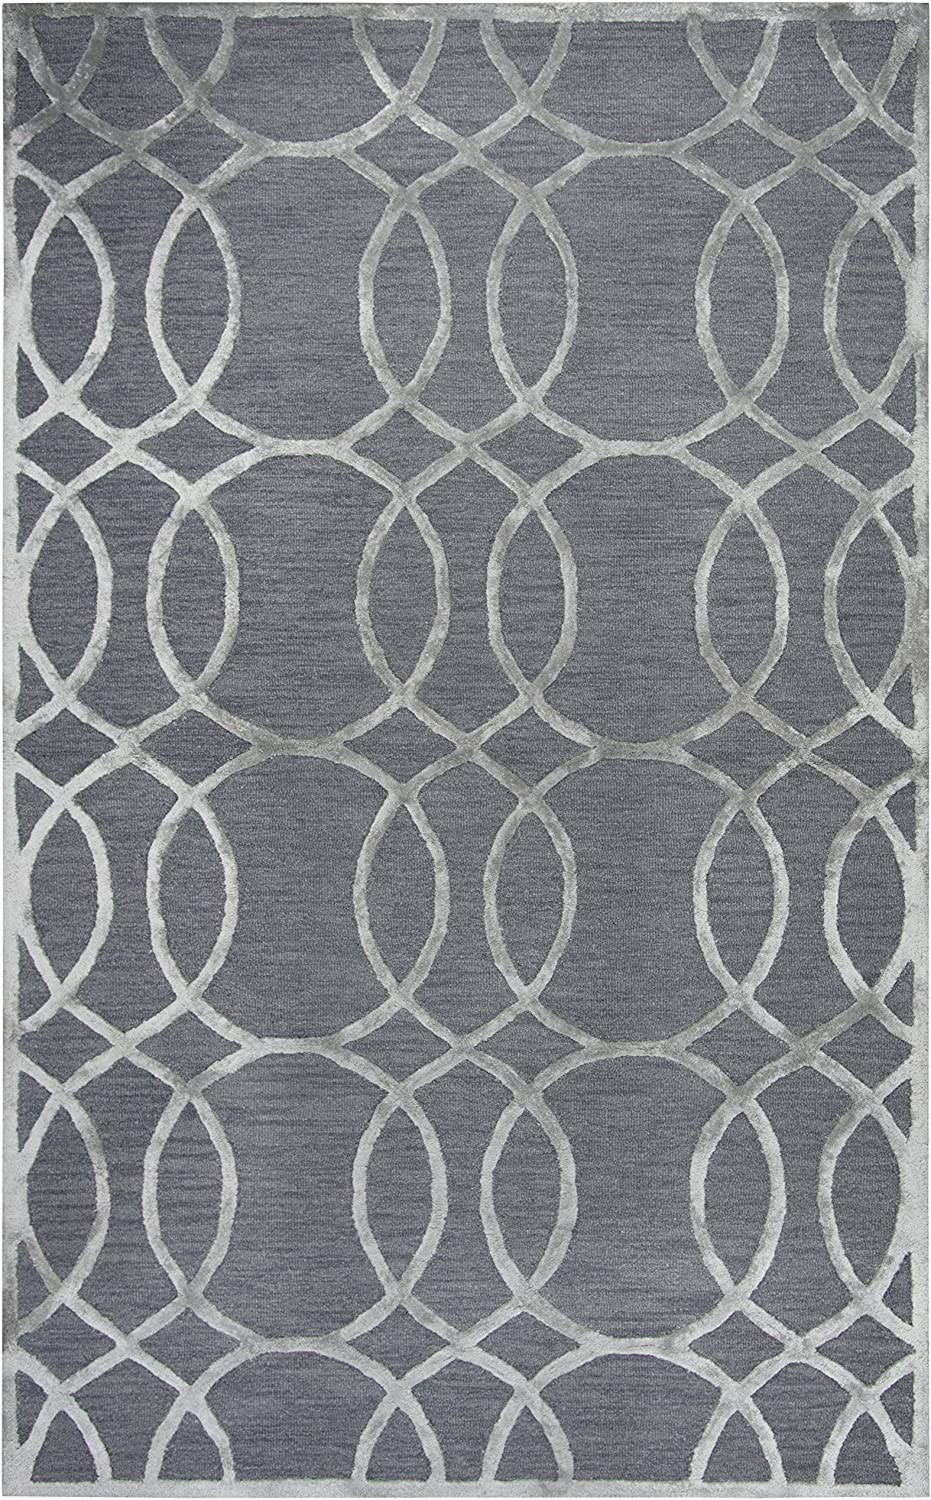 Grey and White area Rug 9×12 Amazon Rizzy Home Monroe Collection Wool Viscose area